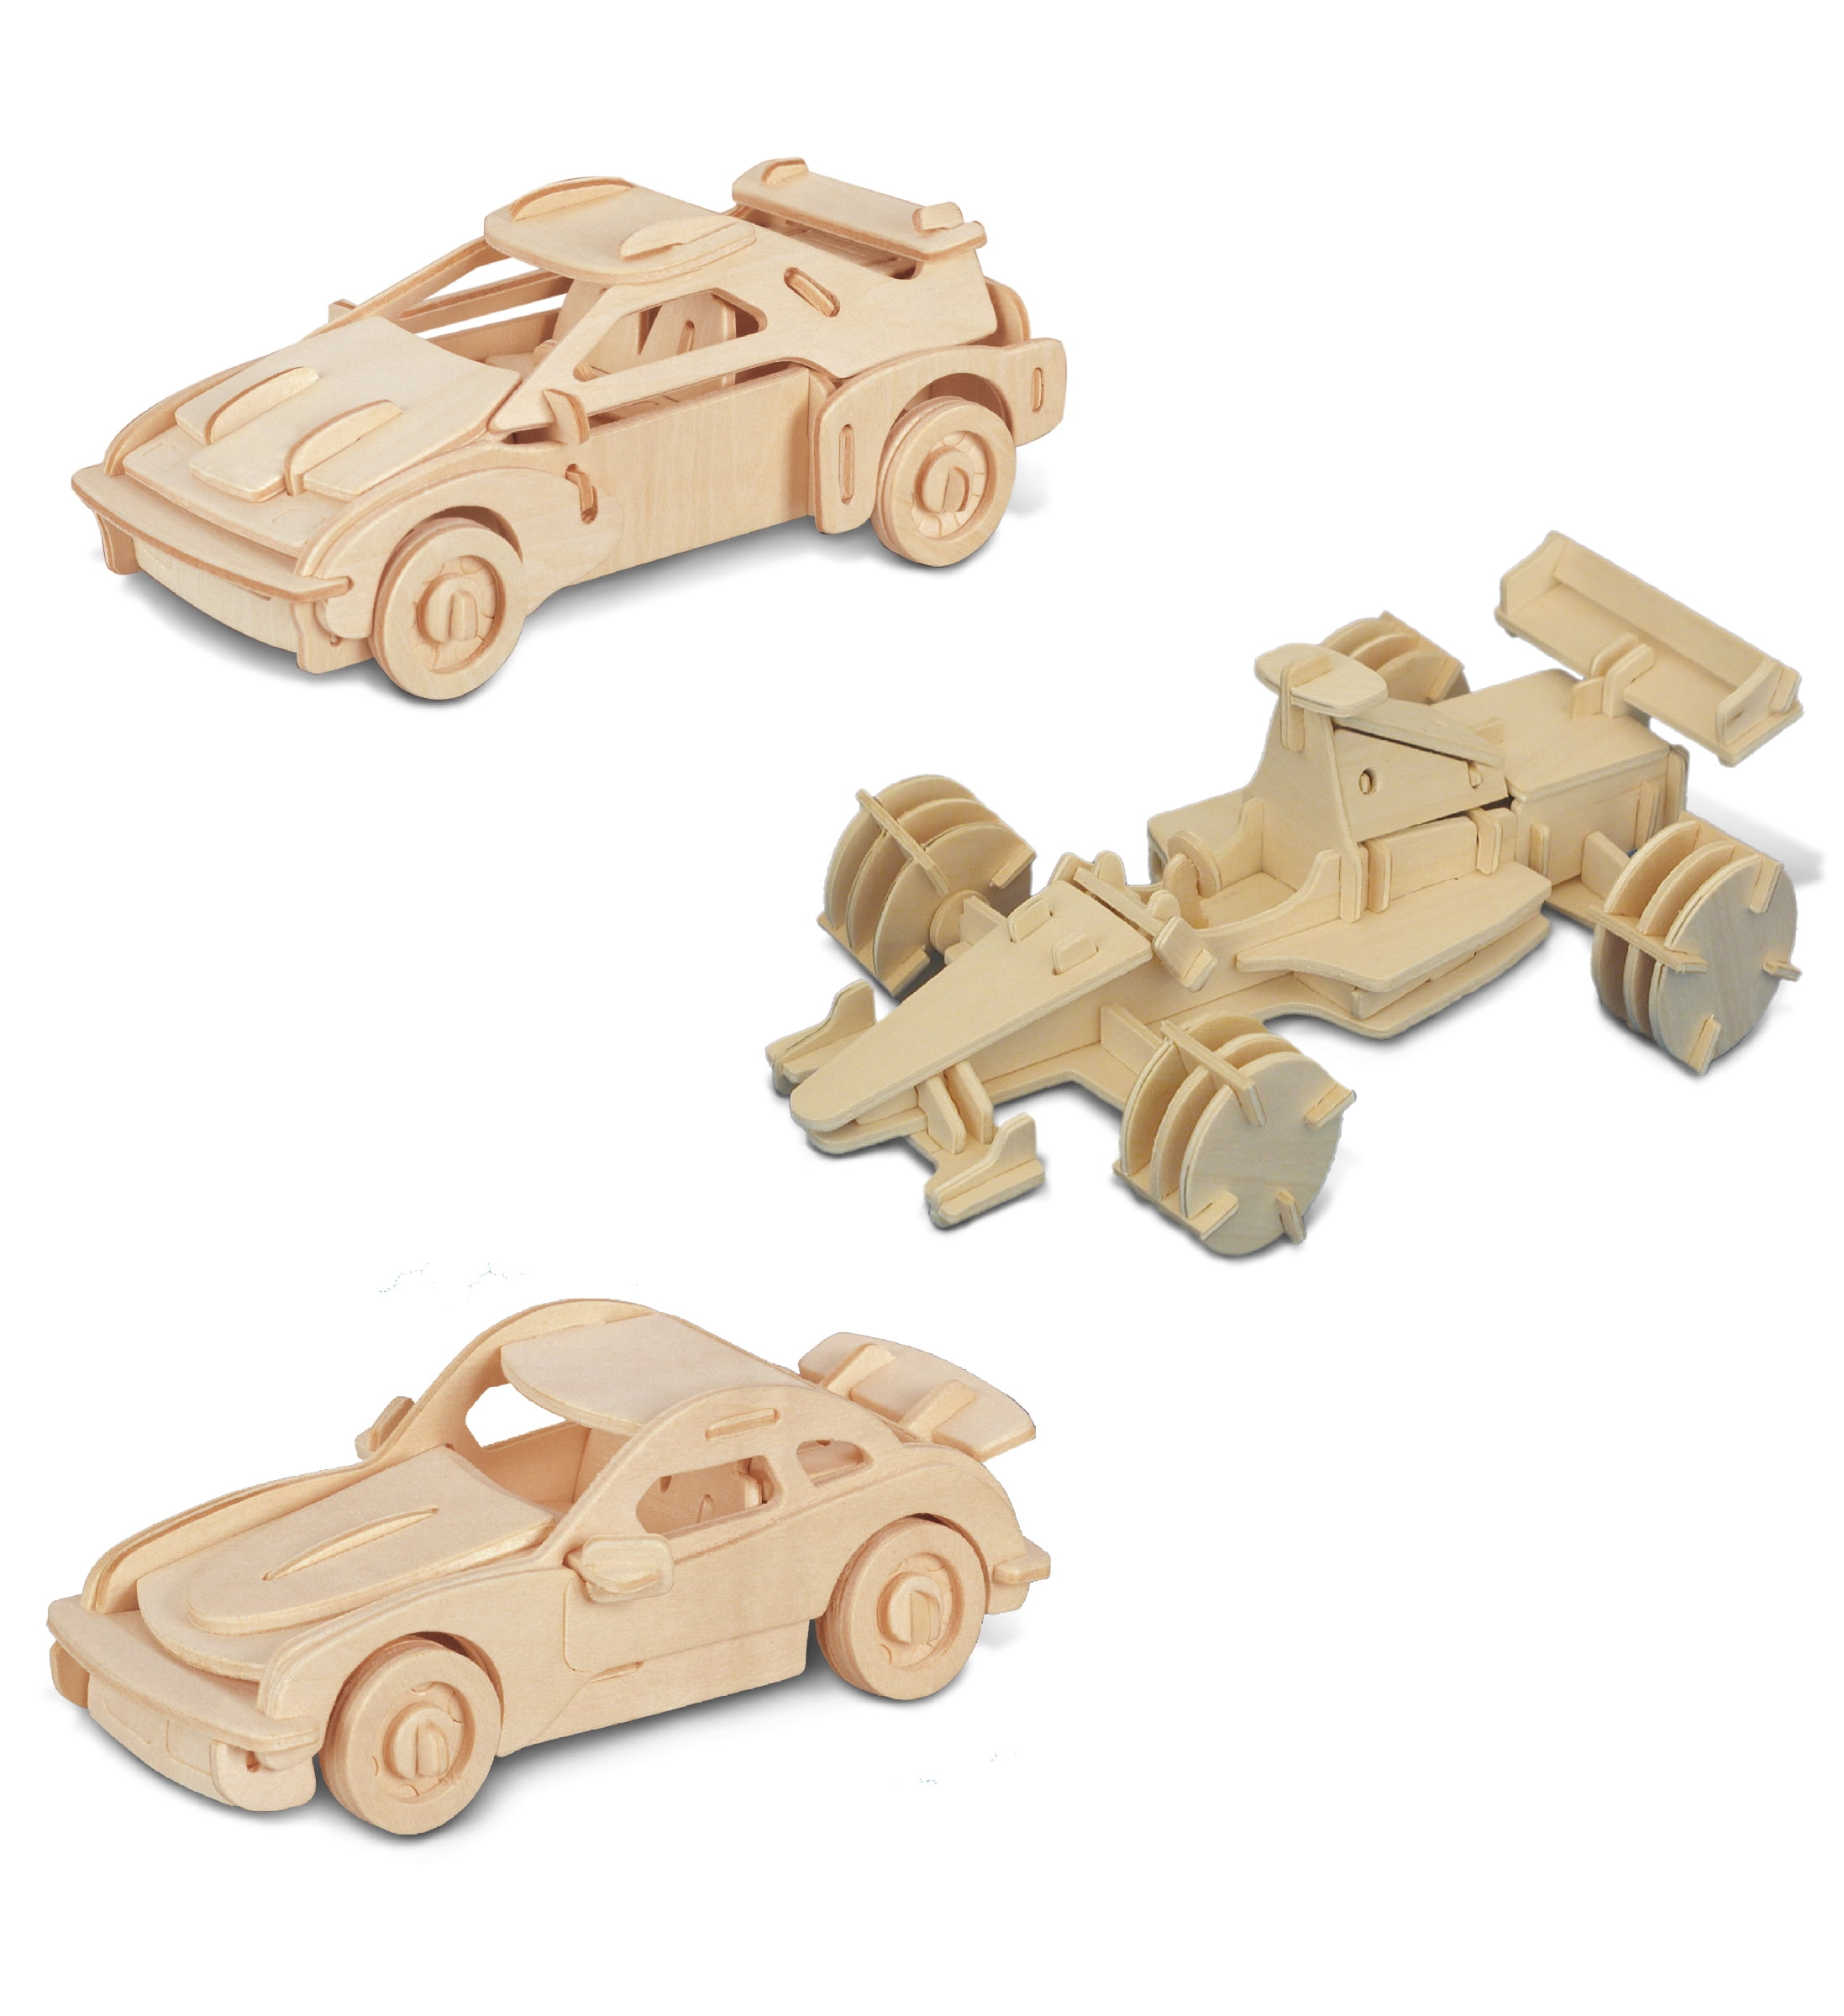 3D Puzzle Toy DIY Wooden Car Assembly Model Kids Gift 